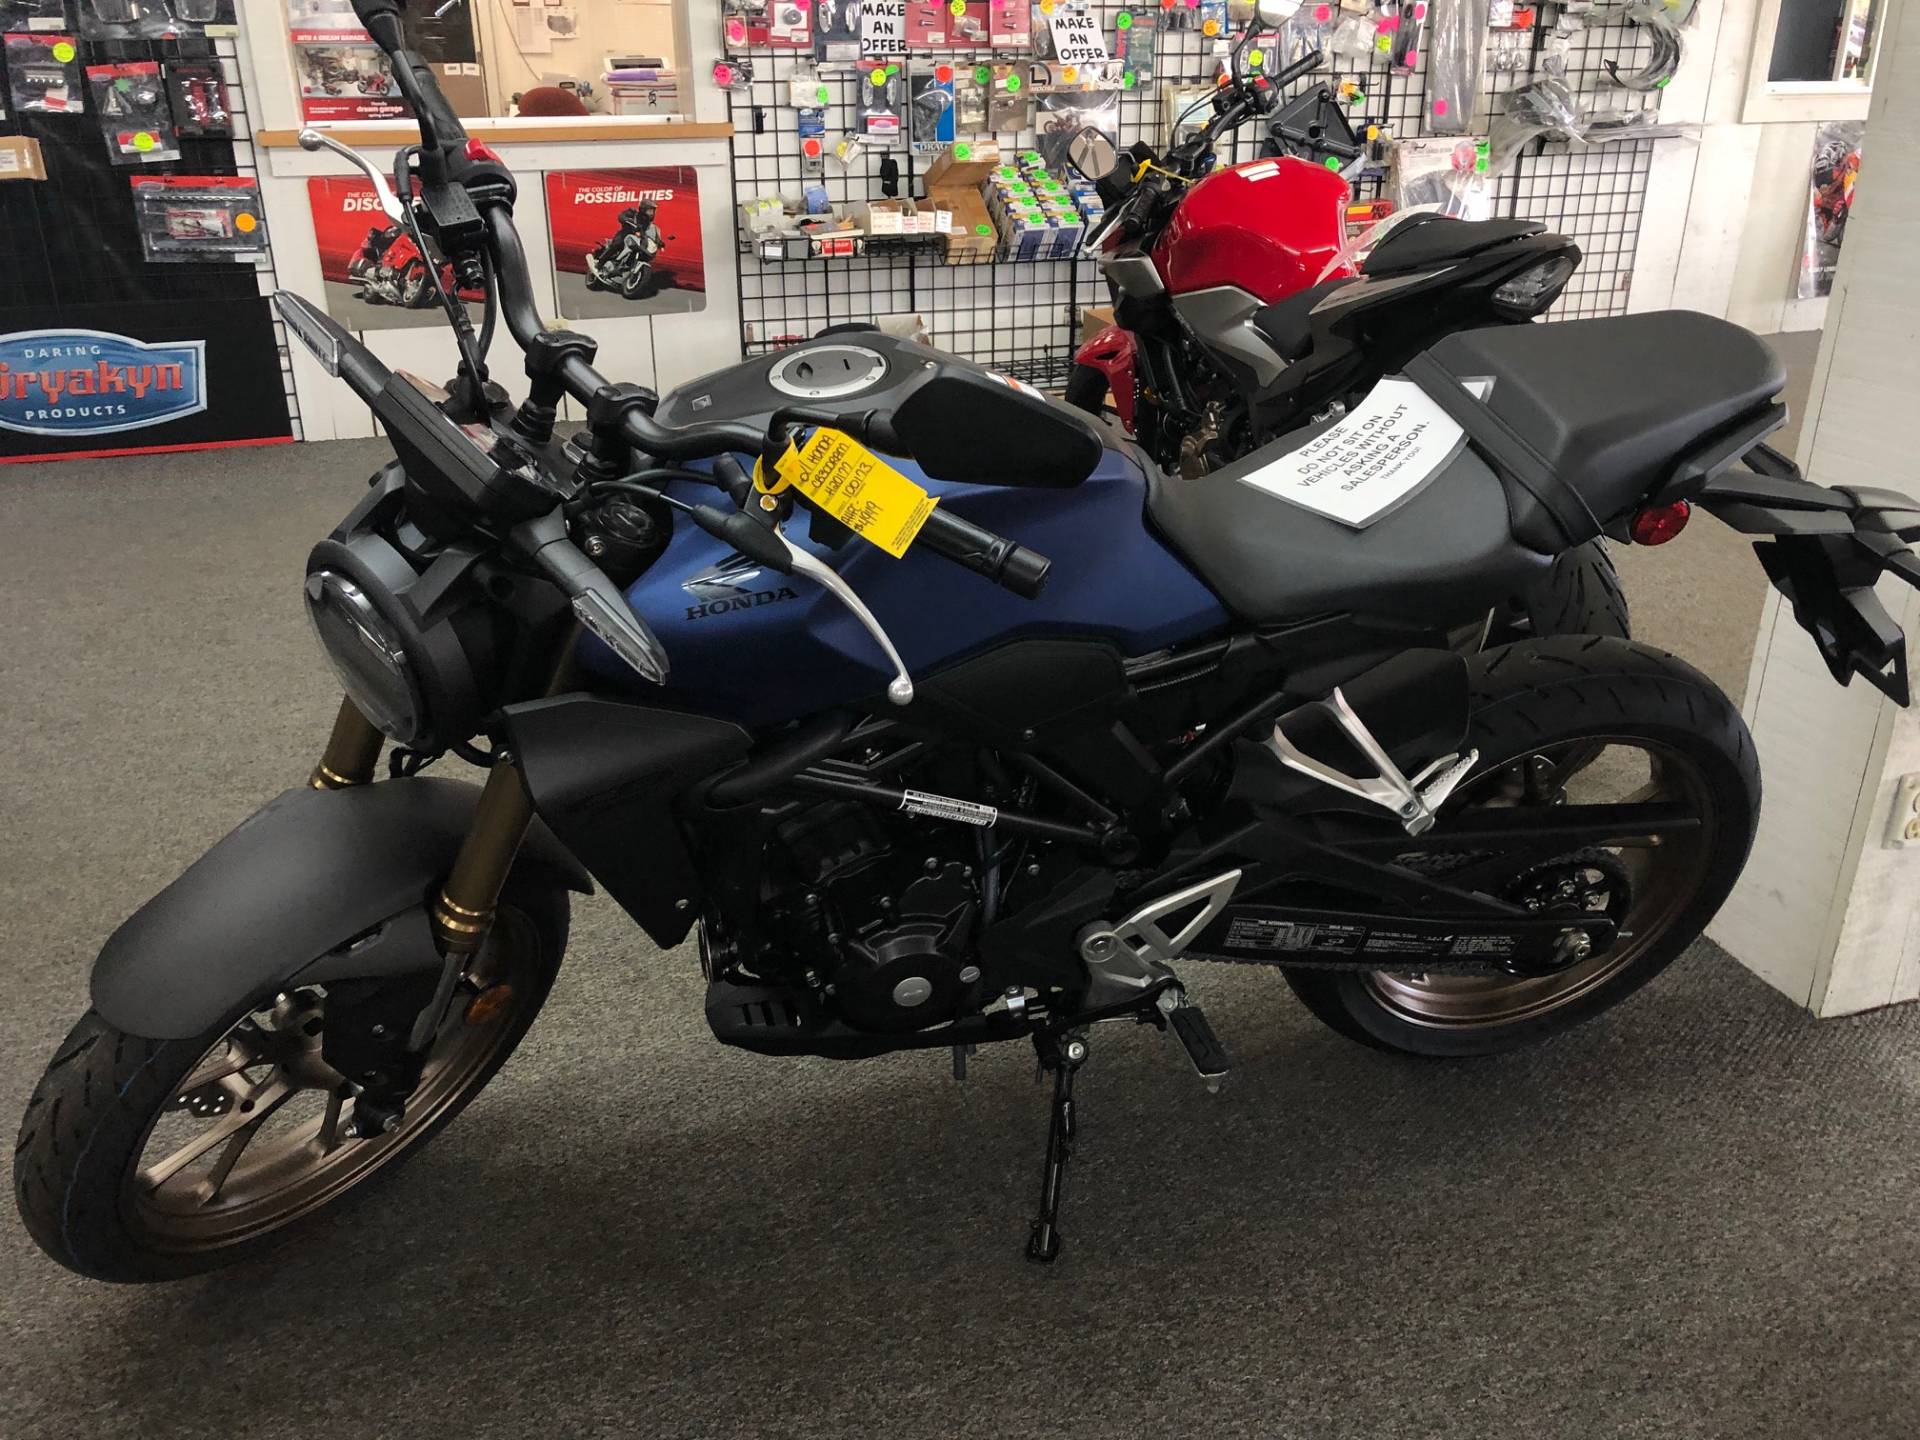 New 2021 Honda CB300R ABS Motorcycles in Aurora, IL ...